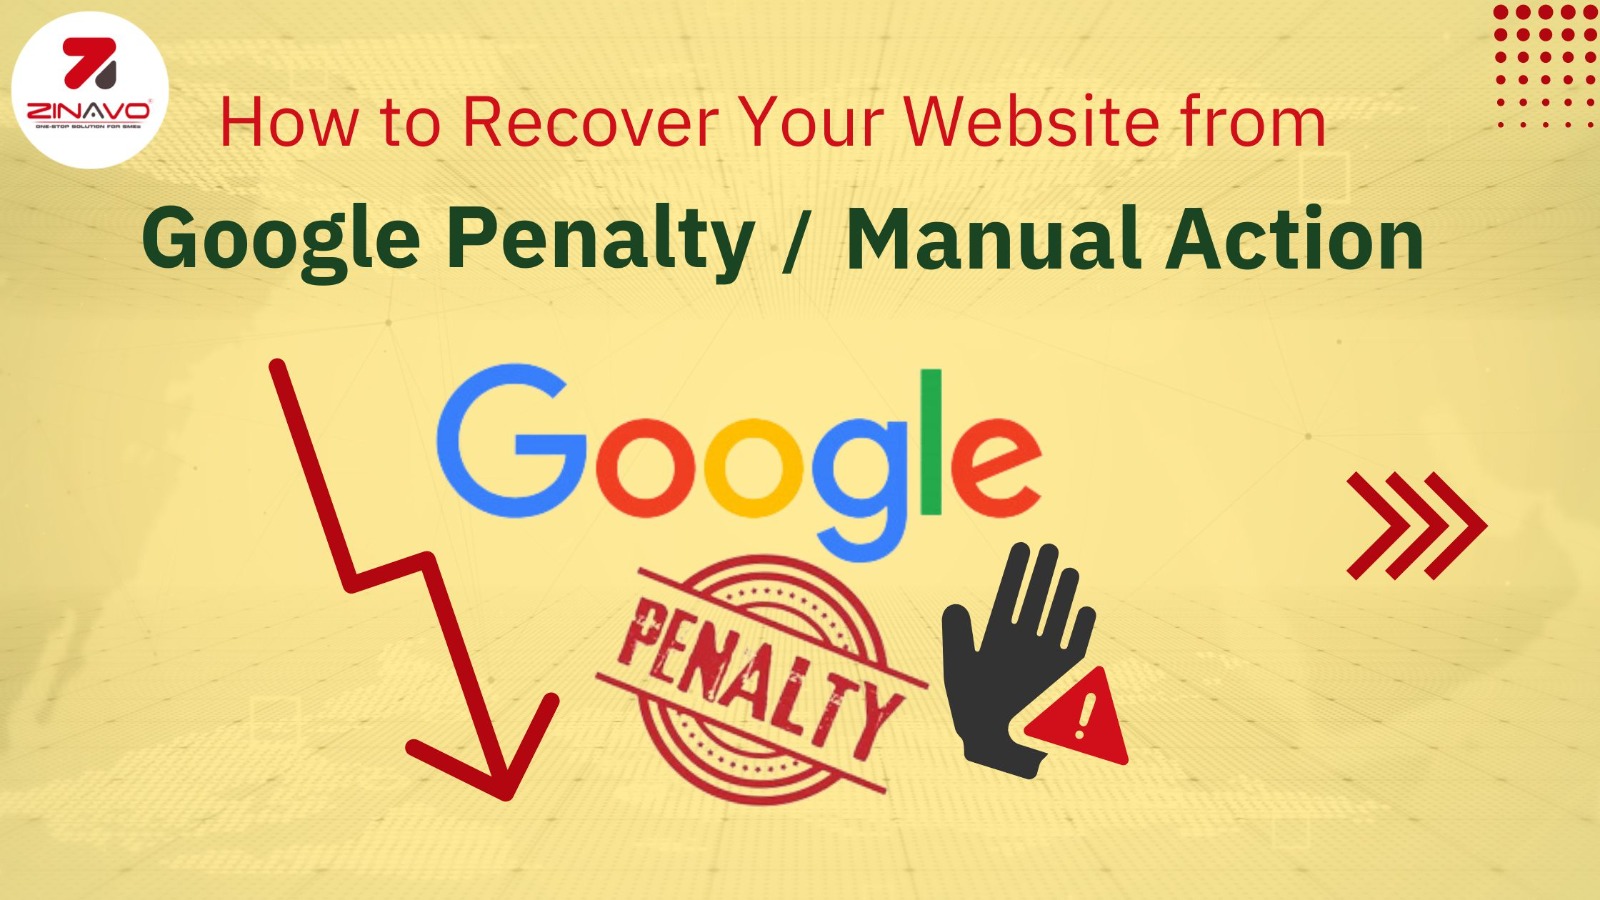 How to Recover Your Website from Google Penalty or Manual Action